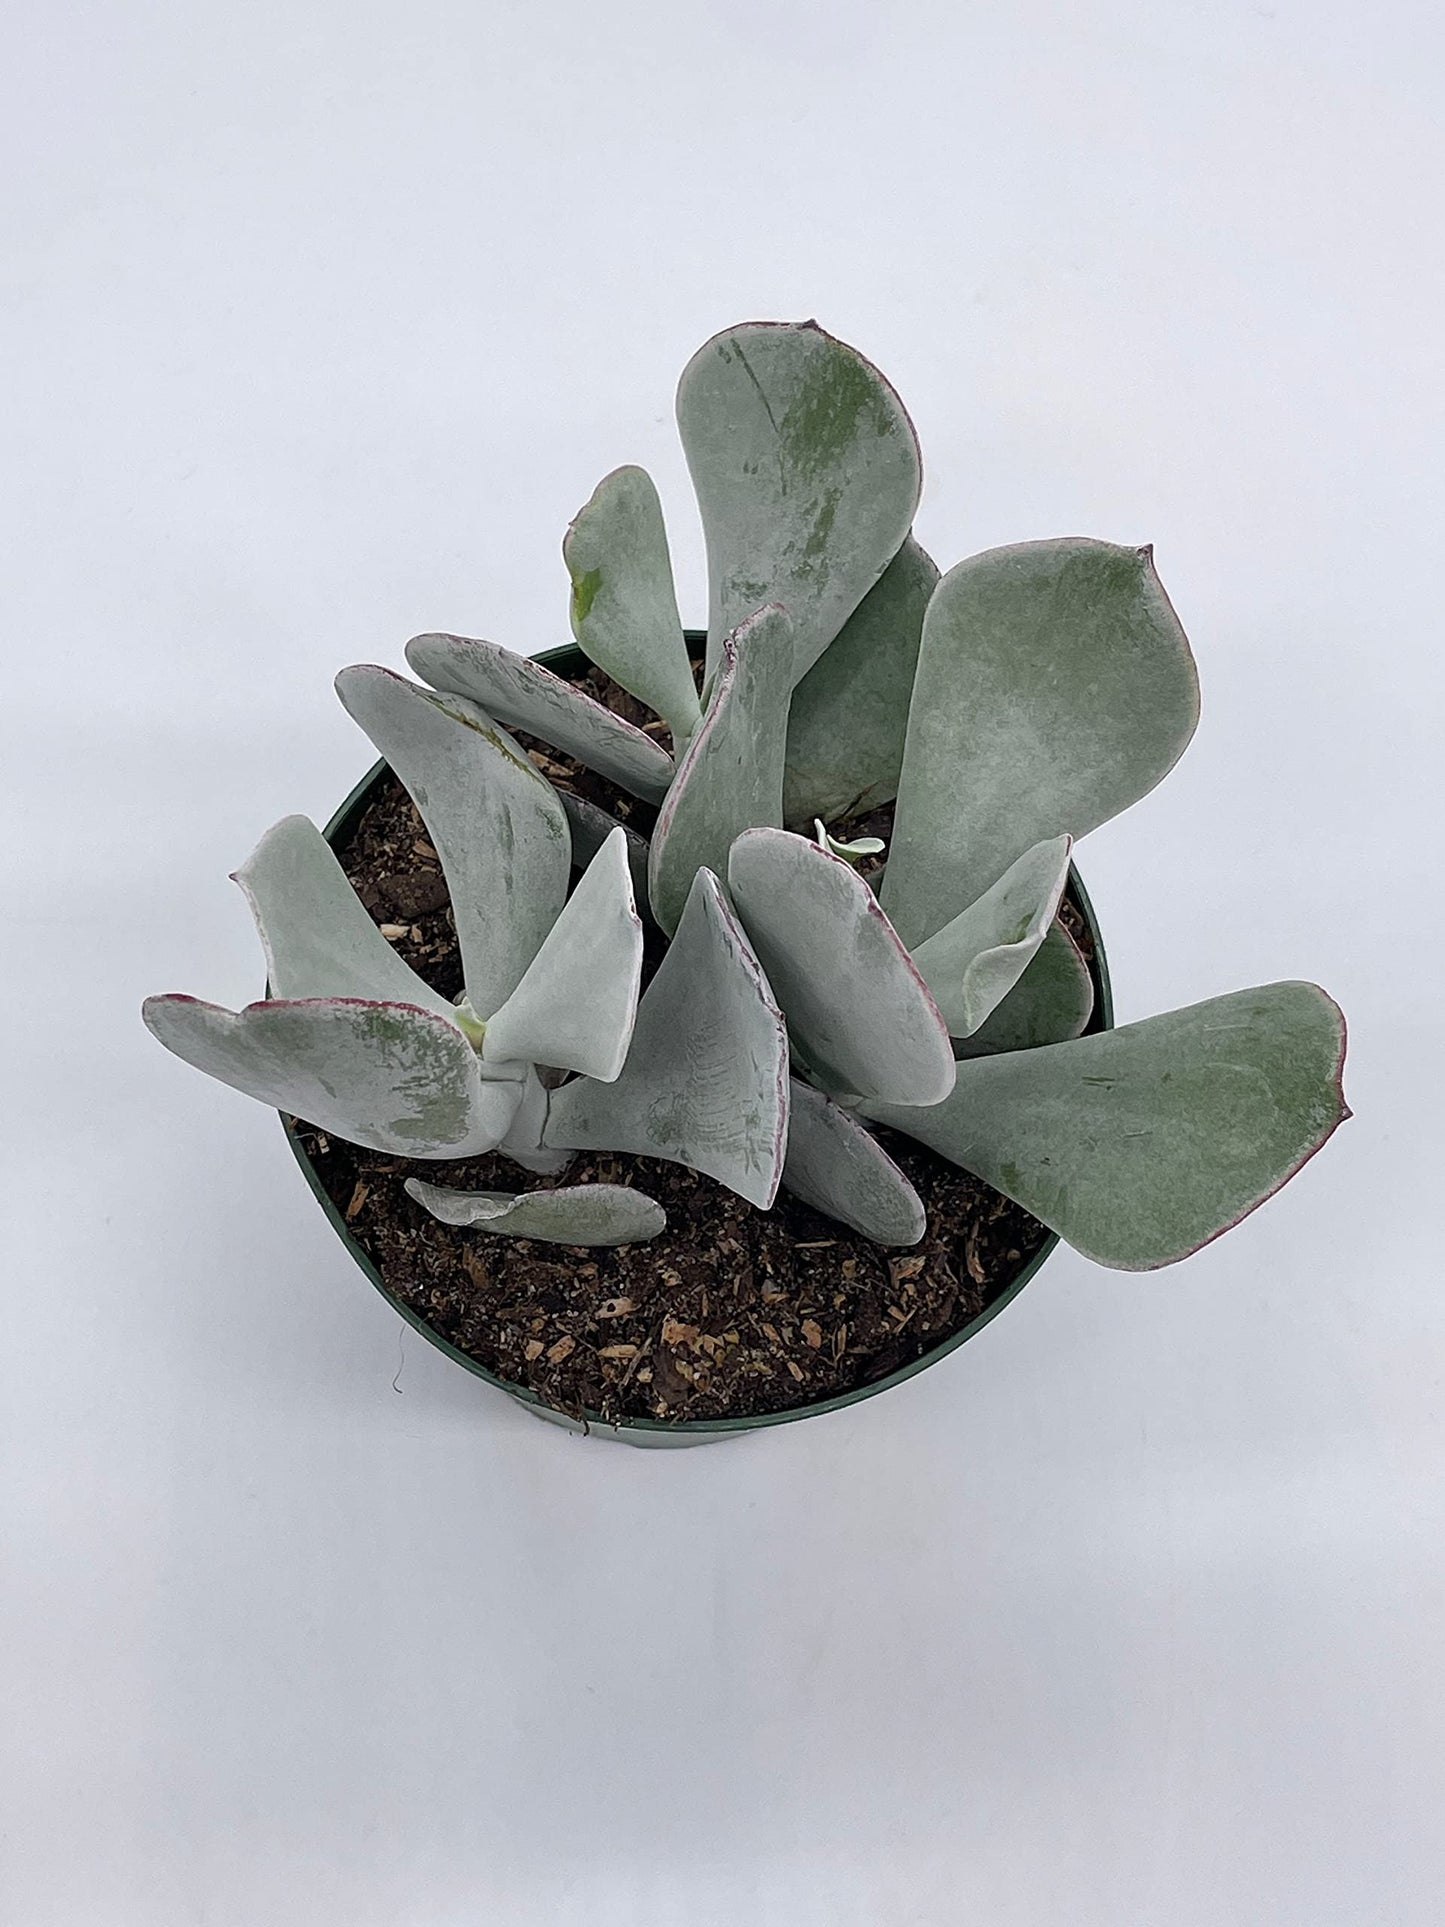 Cotyledon Orbiculata, Pig's Ear, 4 inch Round-leafed Succulent Navel-Wort